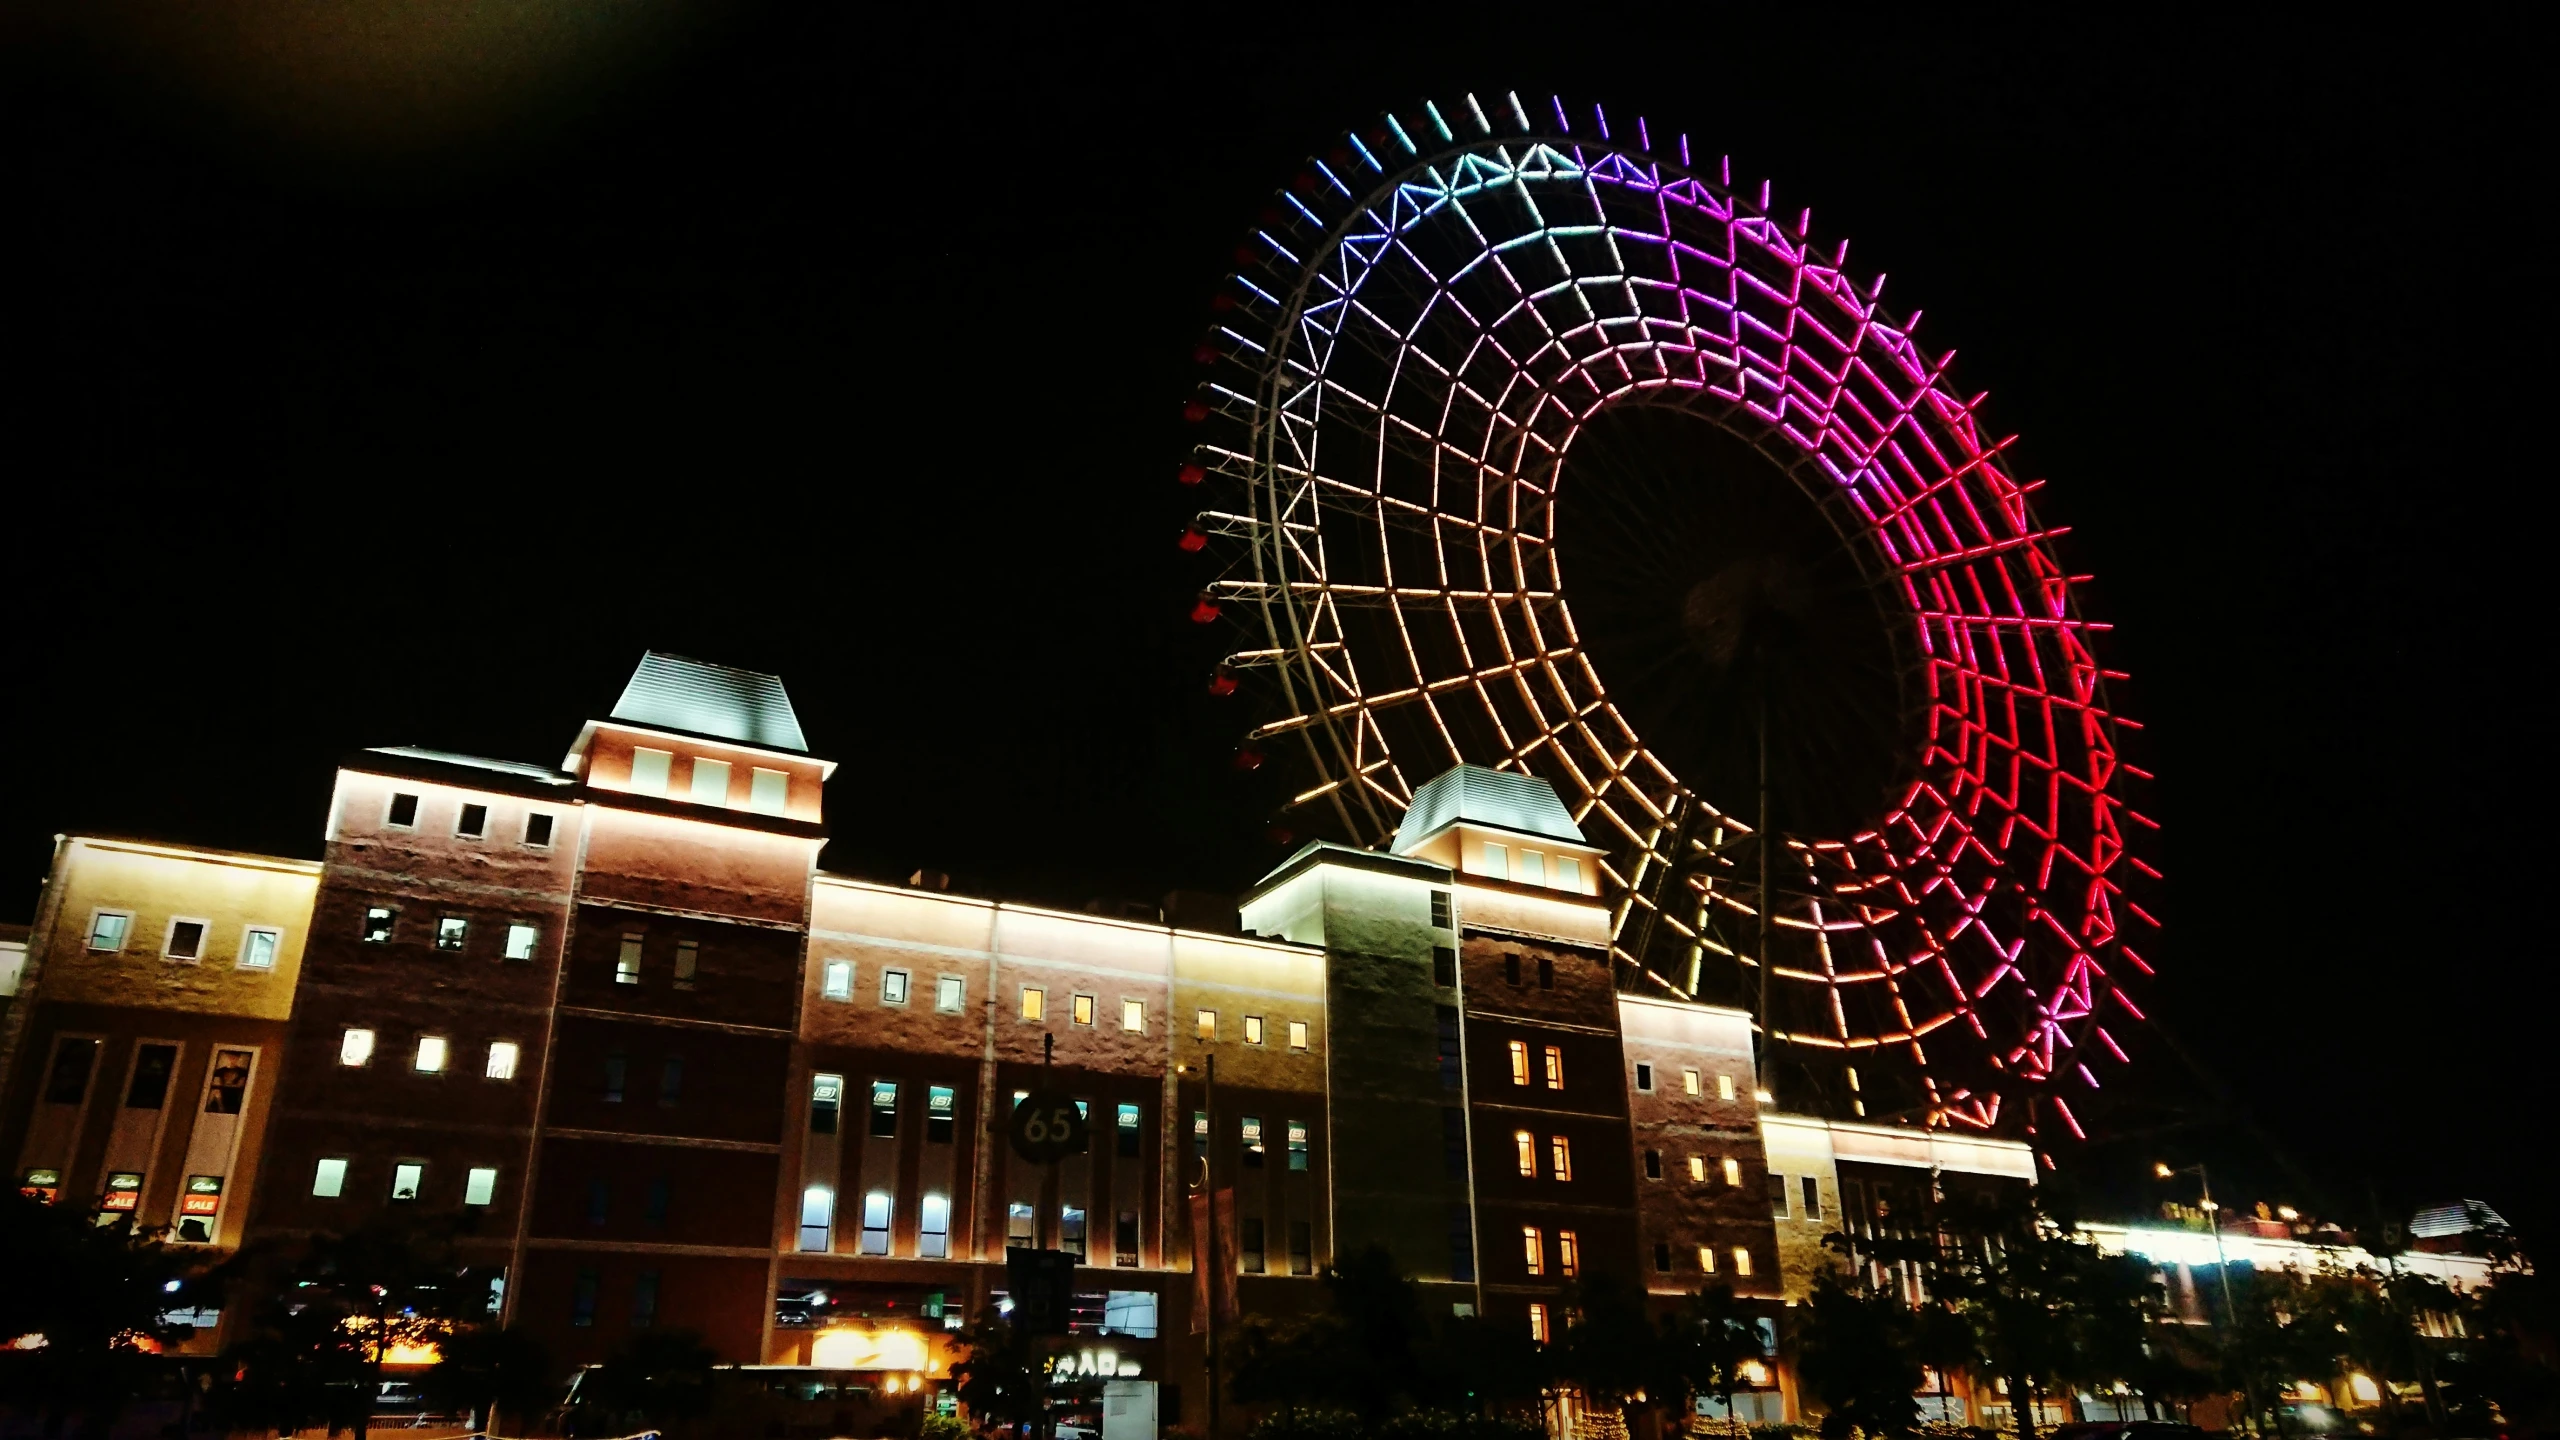 the building with the lighted ferris wheel in it